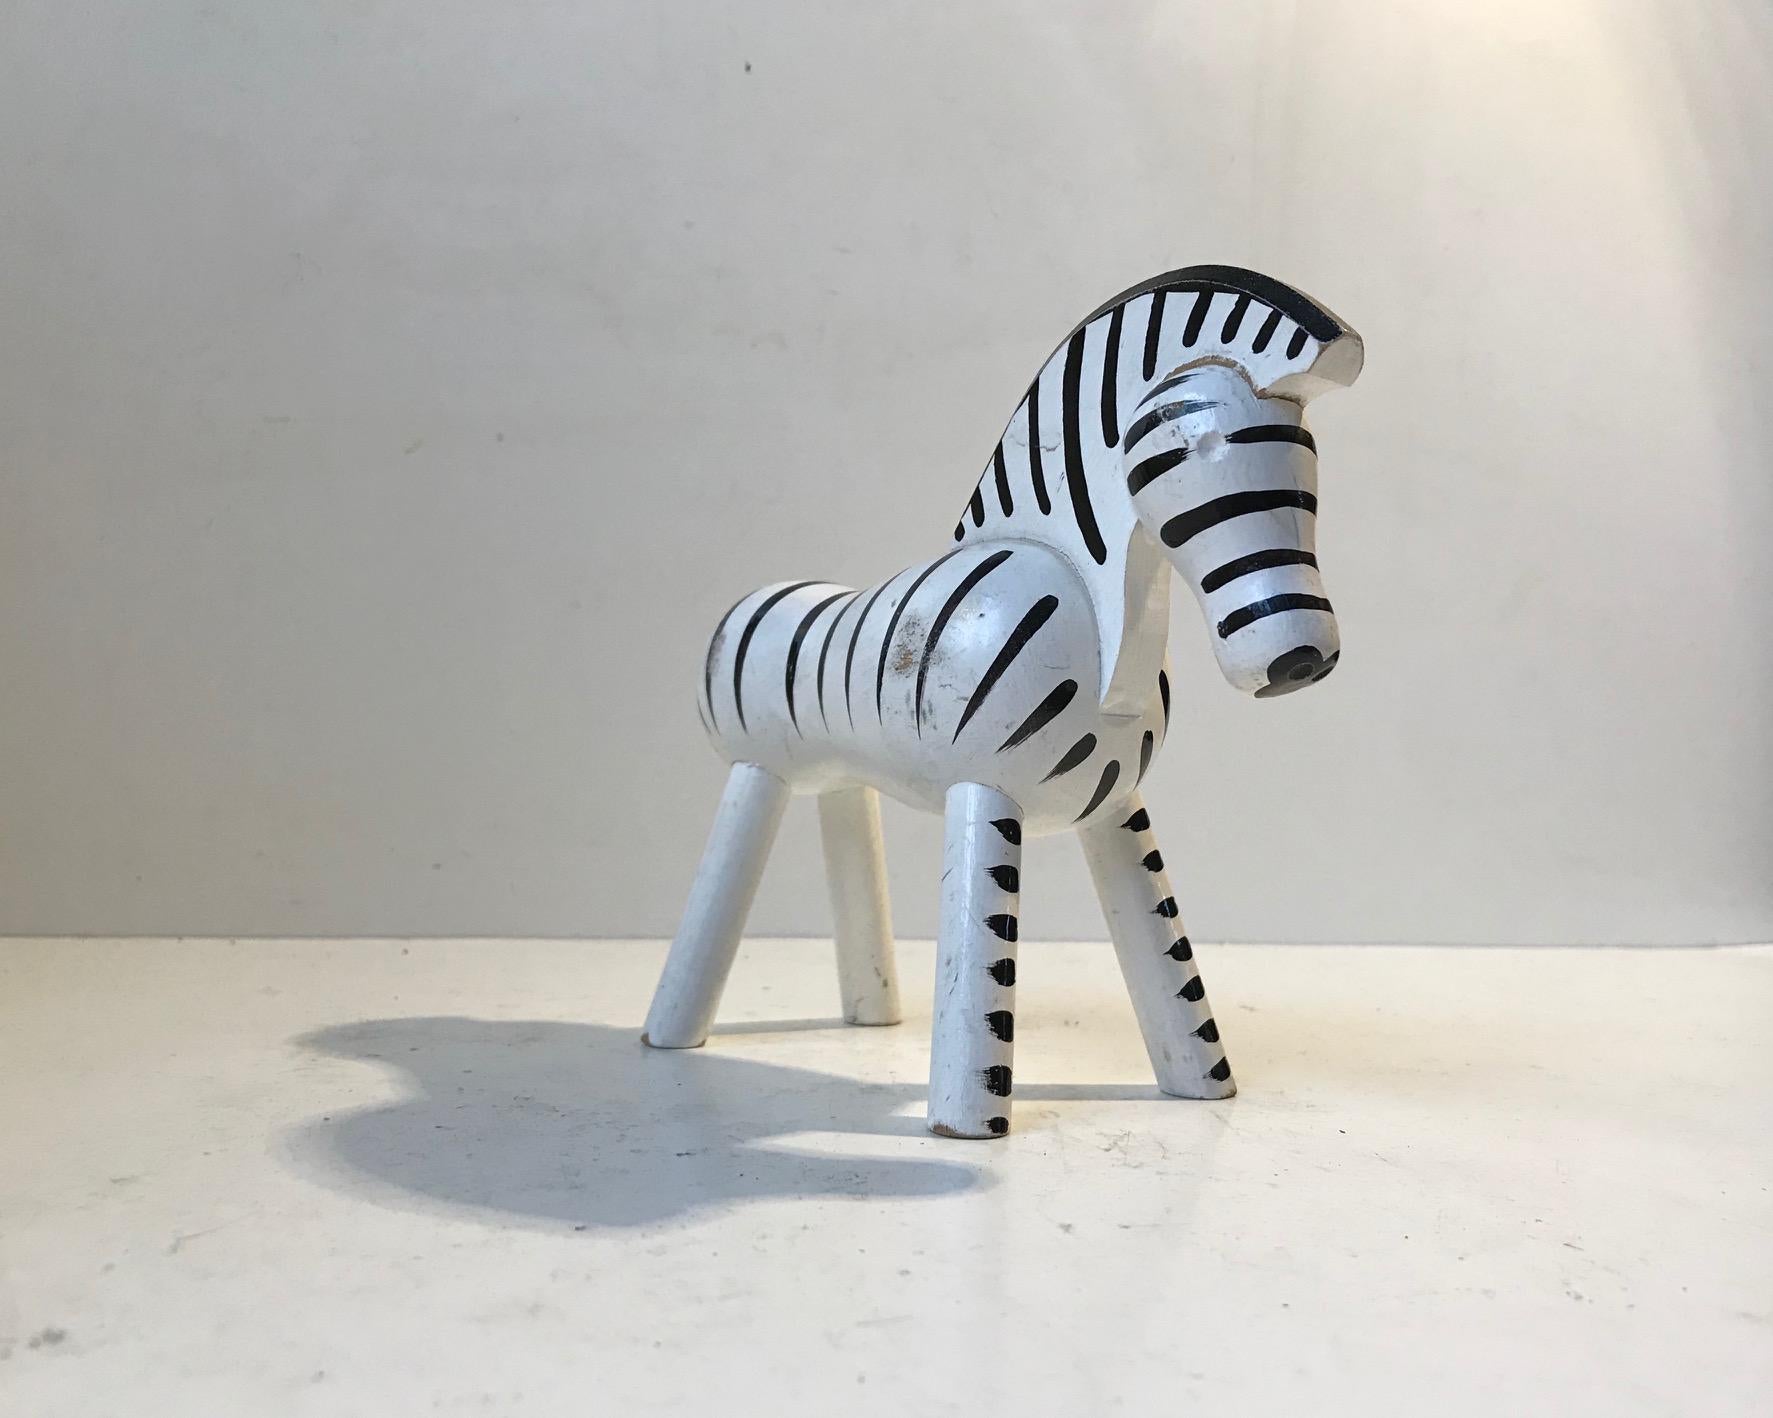 A wooden toy zebra made from Danish beech and hand painted white and black.
It was designed by Kay Bojesen in 1936. This particular example was manufactured in the 1950s. It has been played with and it shows in the most charming way and in all the